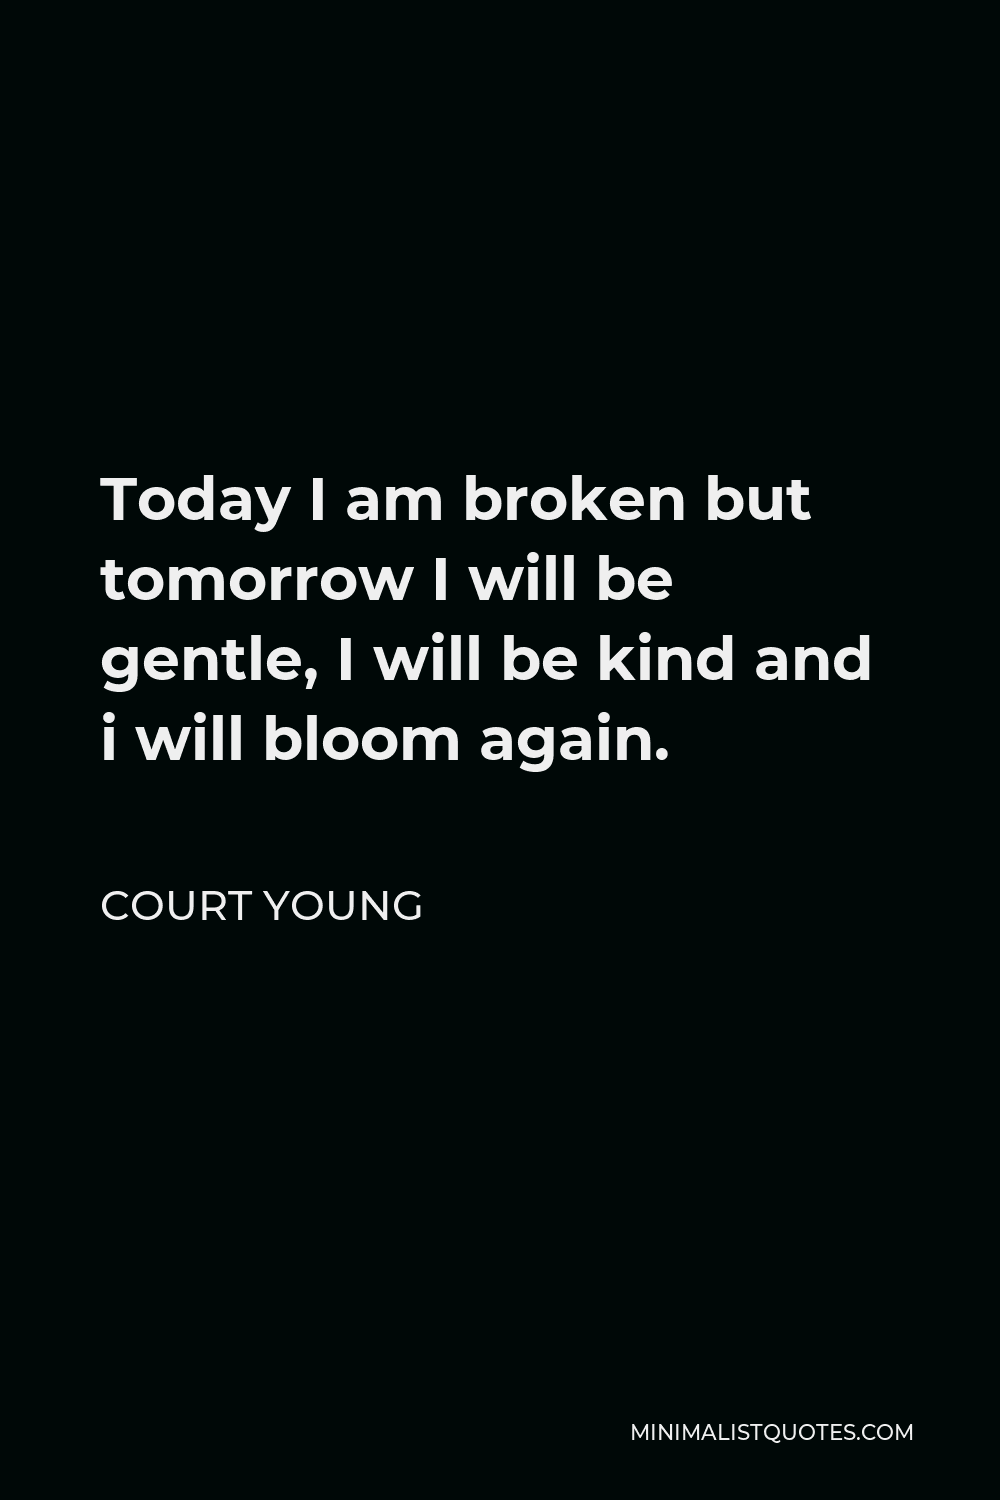 Court Young Quote: Today I am broken but tomorrow I will be gentle ...